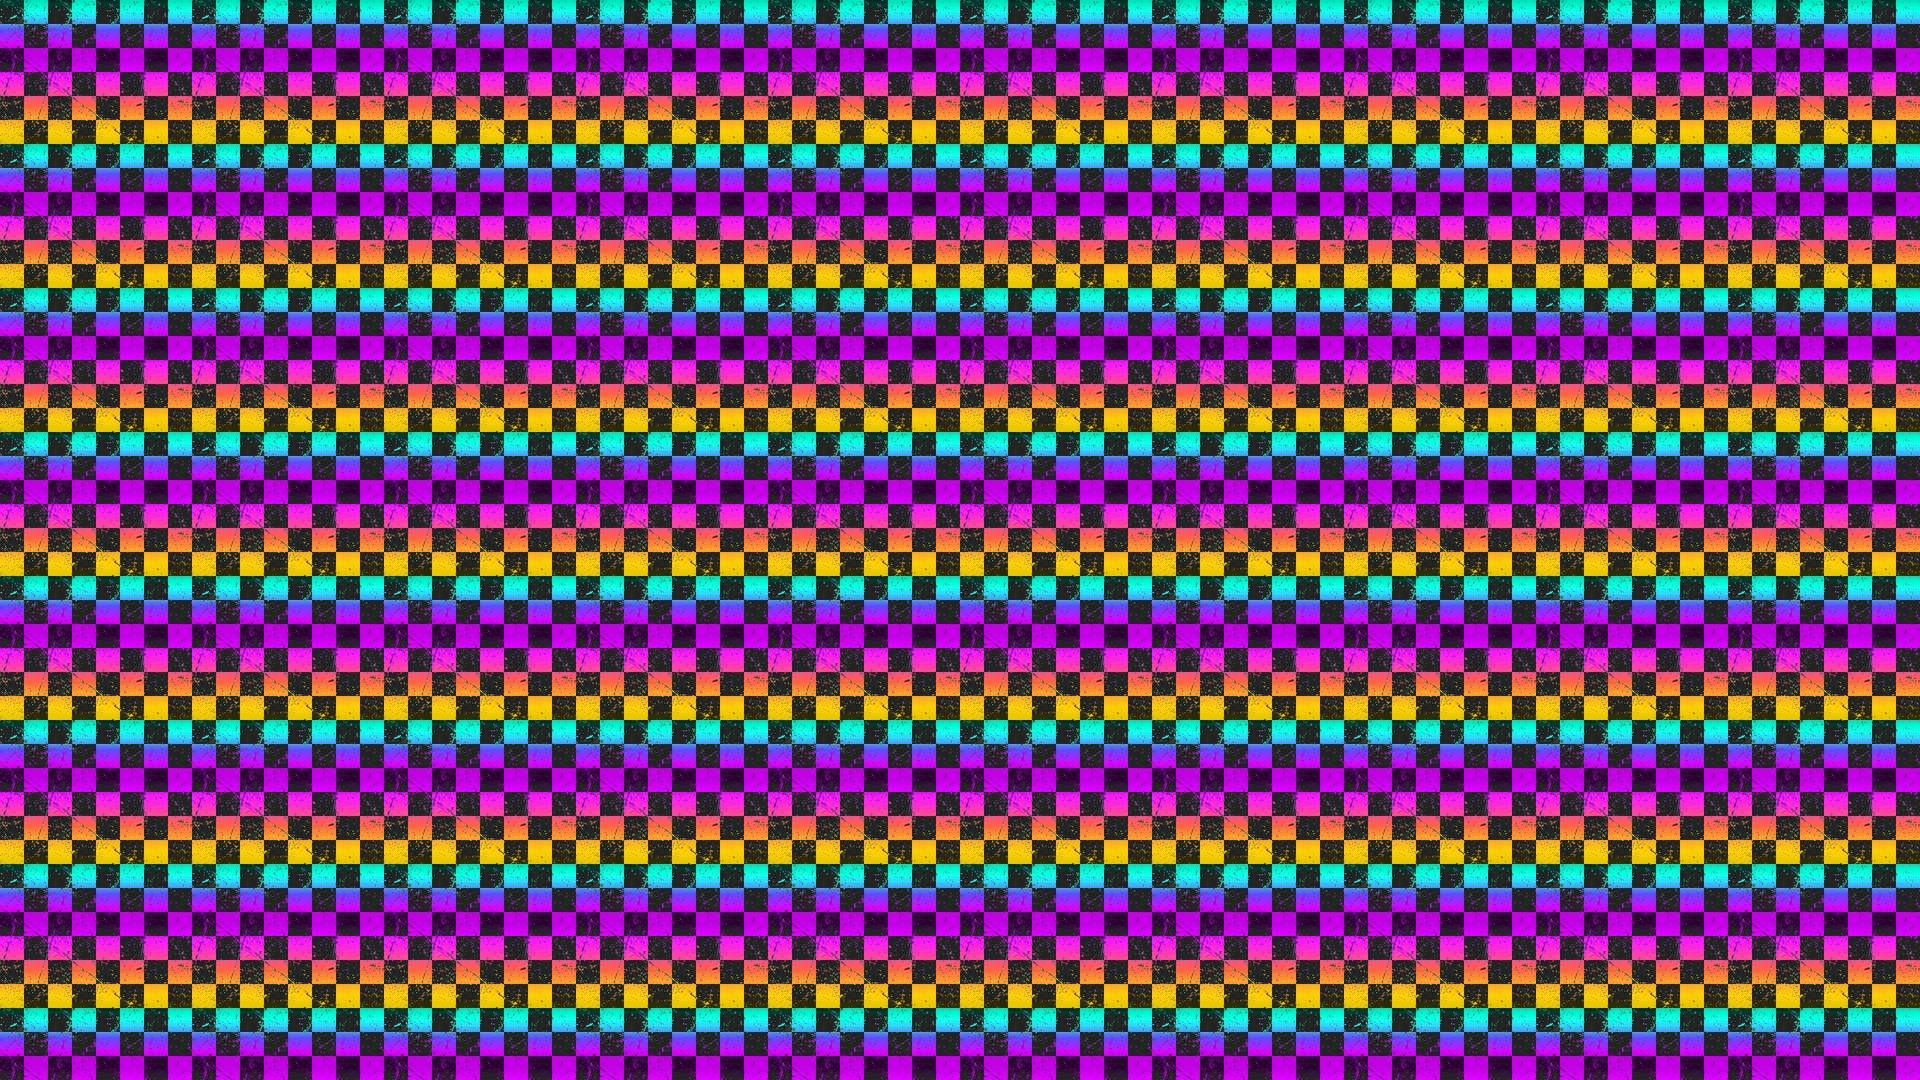 A colorful pattern with squares and rectangles - Grunge, checkered